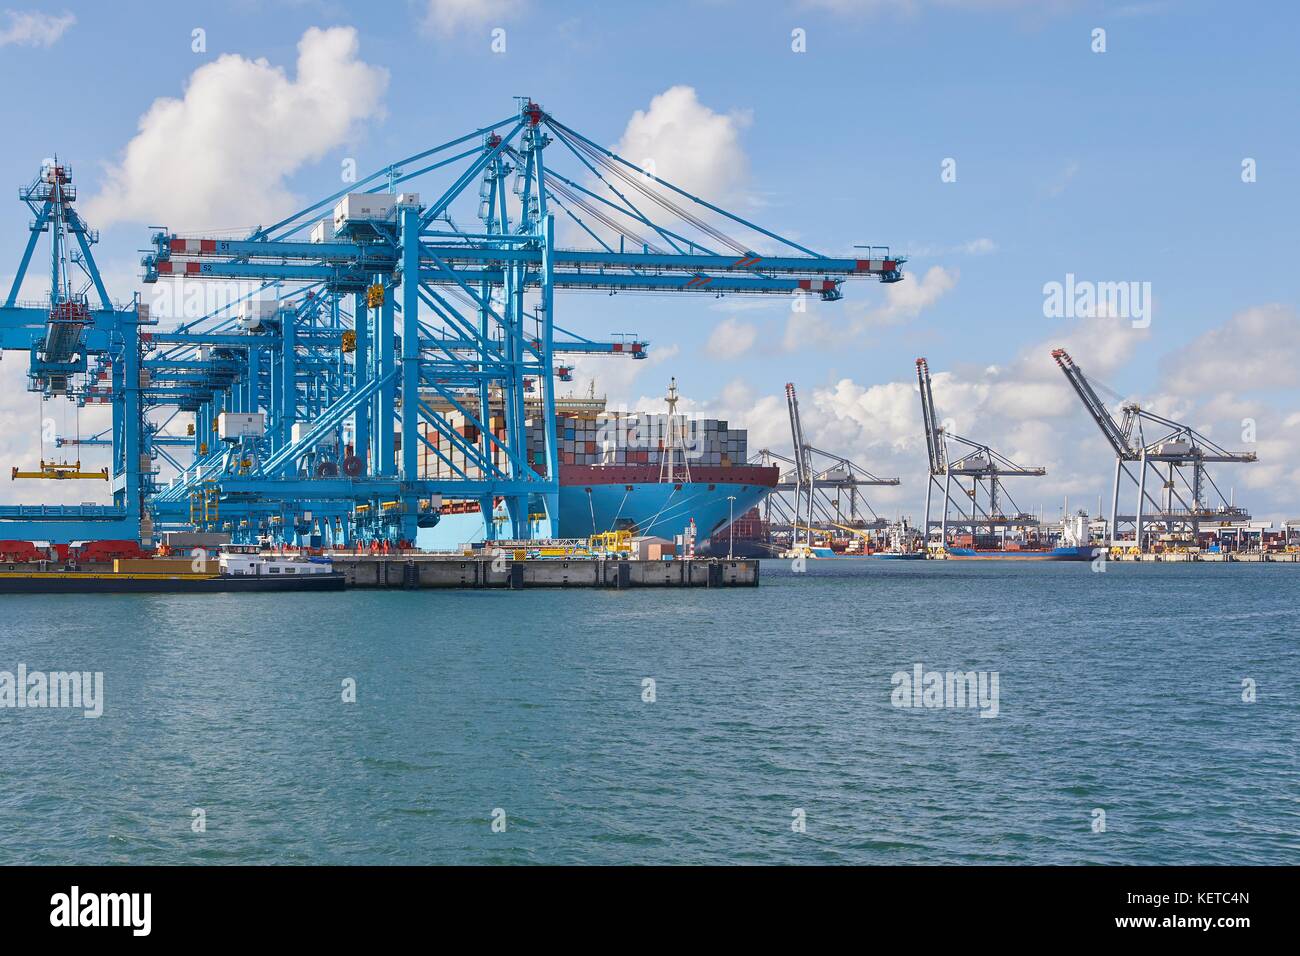 Huge container ship in port Stock Photo